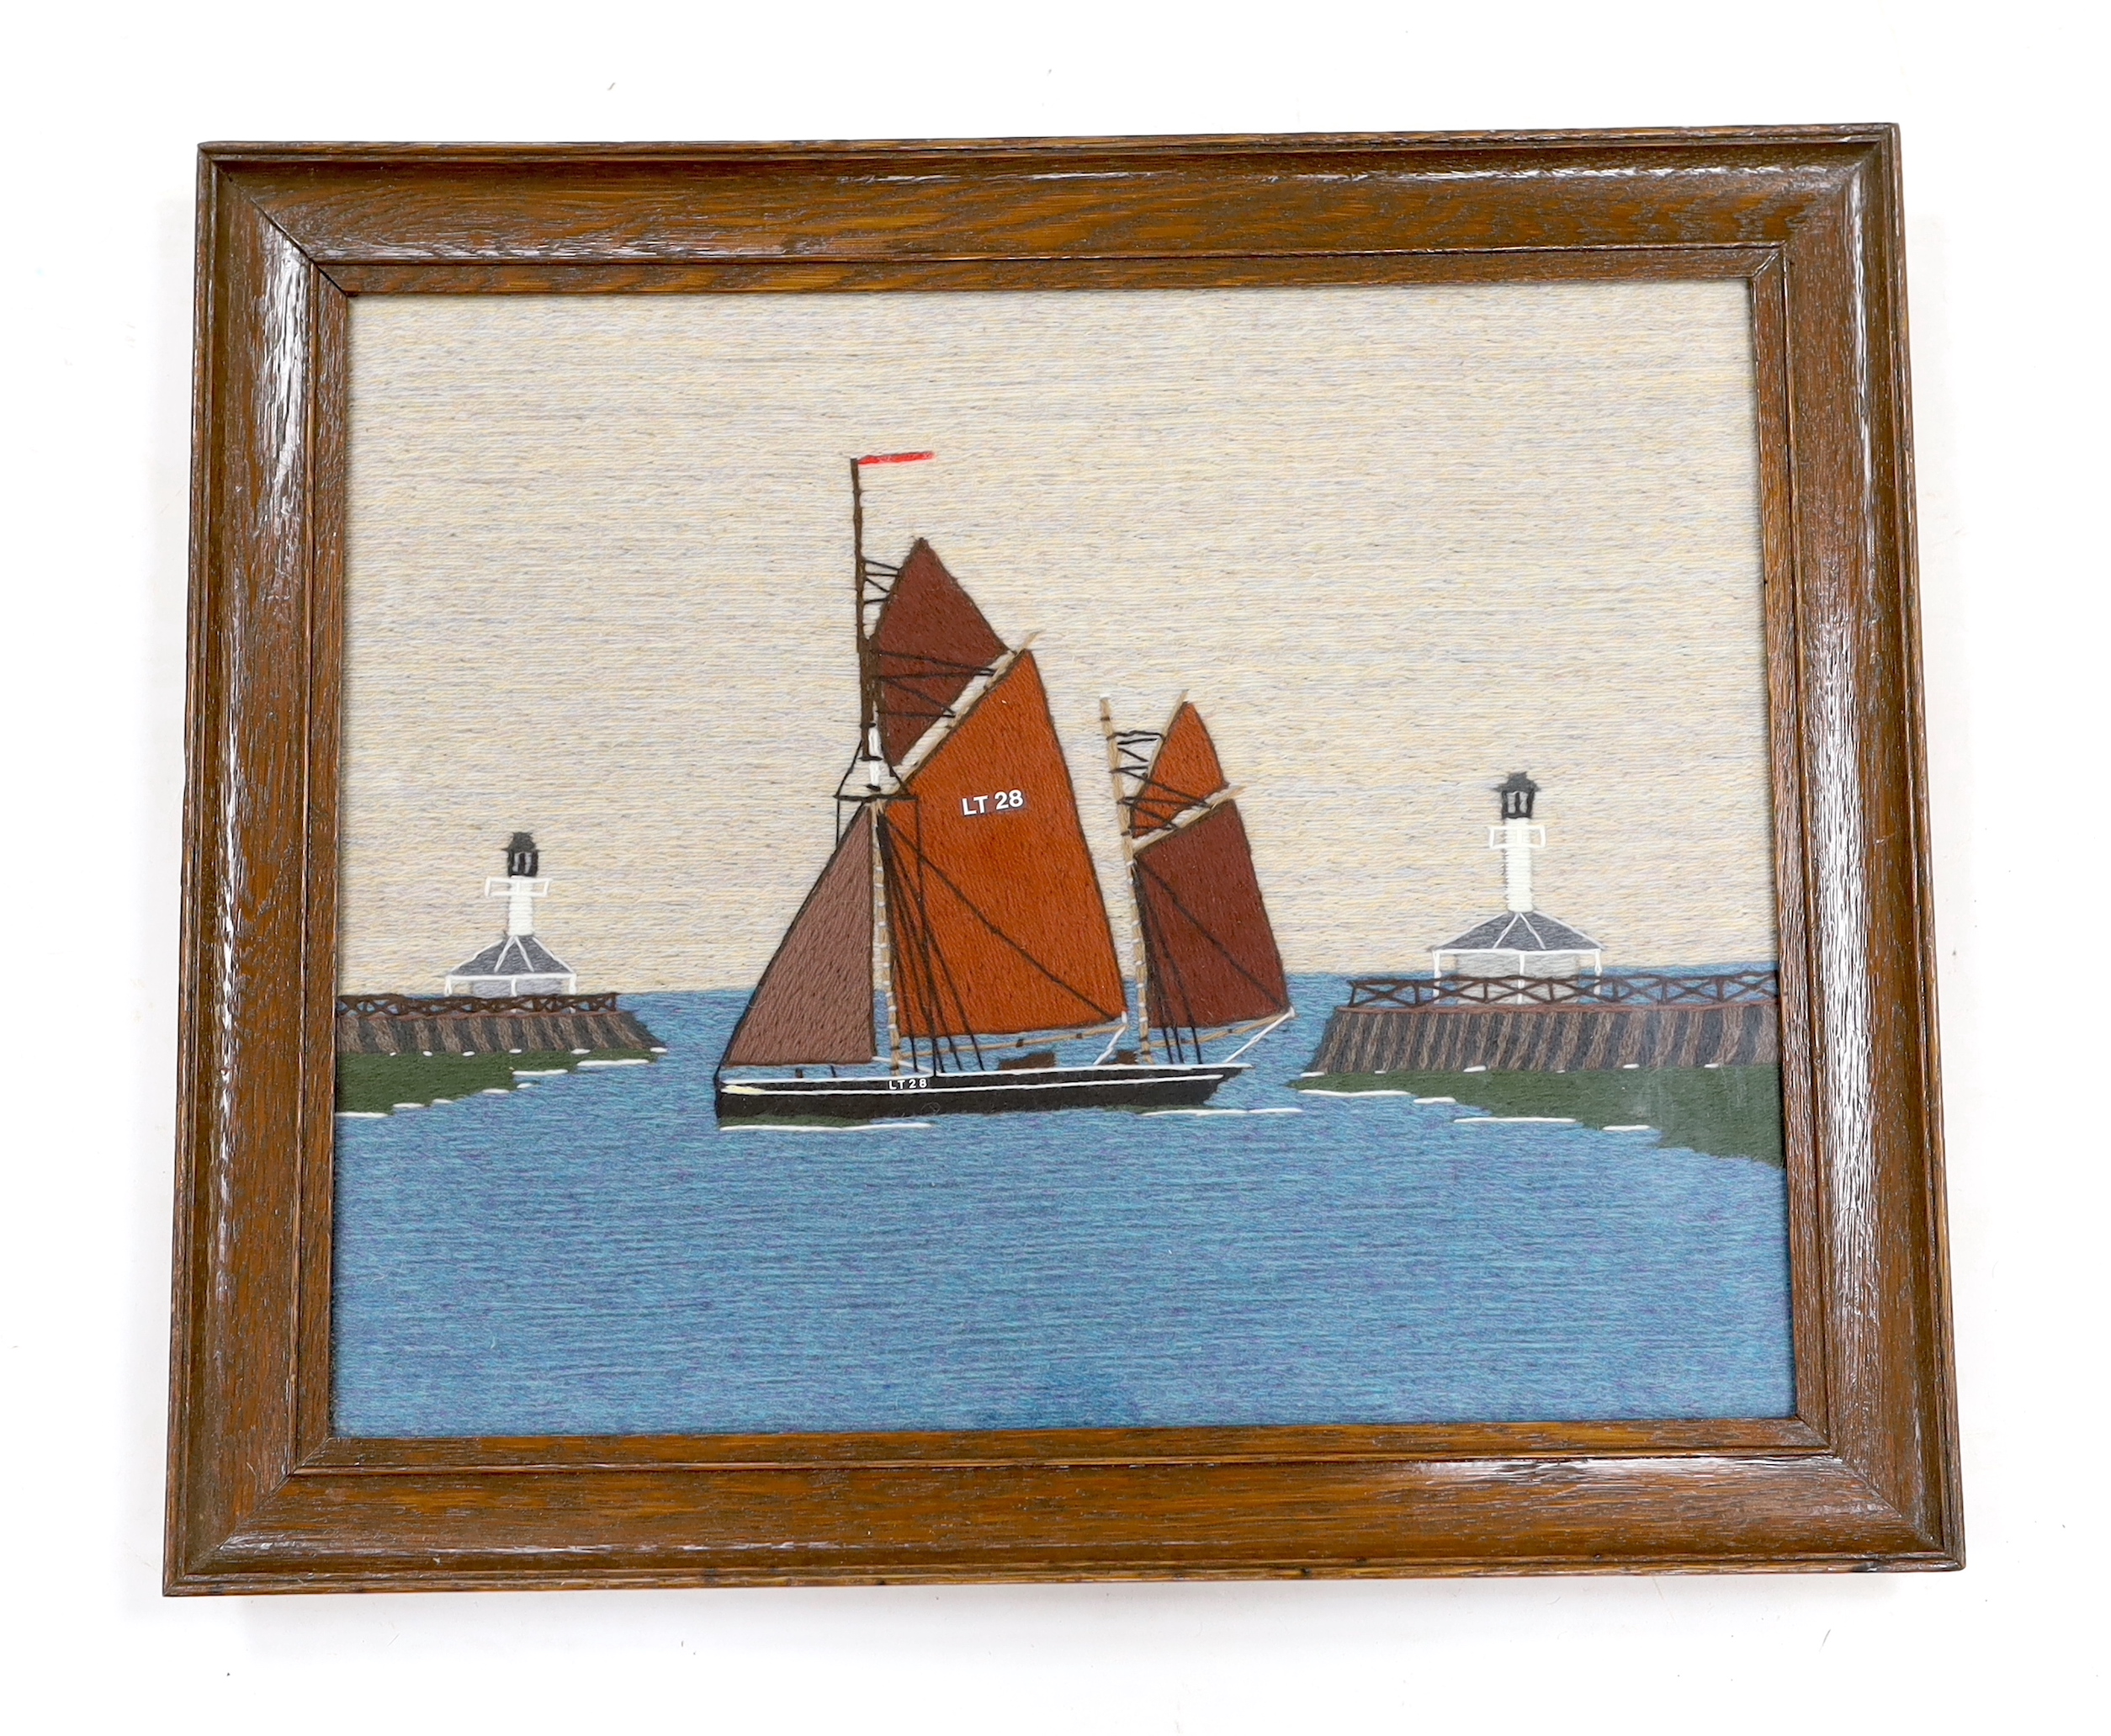 A long stitch wool work embroidery of ‘The Lowestoft Ketch Susie LT28’, in a harbour mouth, 20th century, 35.5 x 44cm.